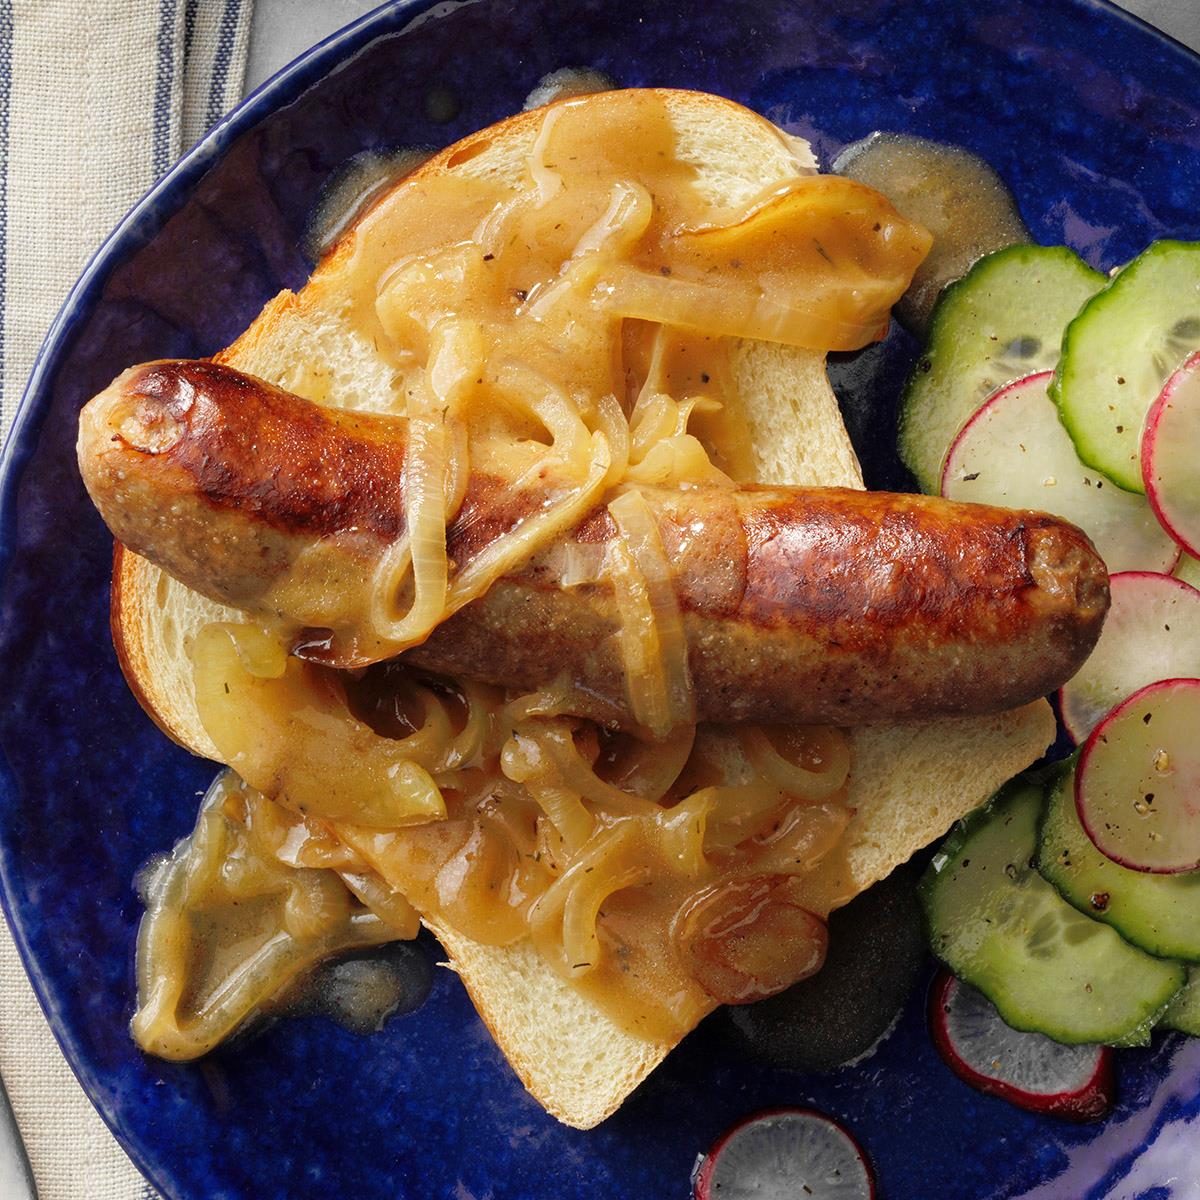 Open Faced Bratwurst Sandwiches With Beer Gravy Exps Tohescodr20 209144 E03 12 4b Copy